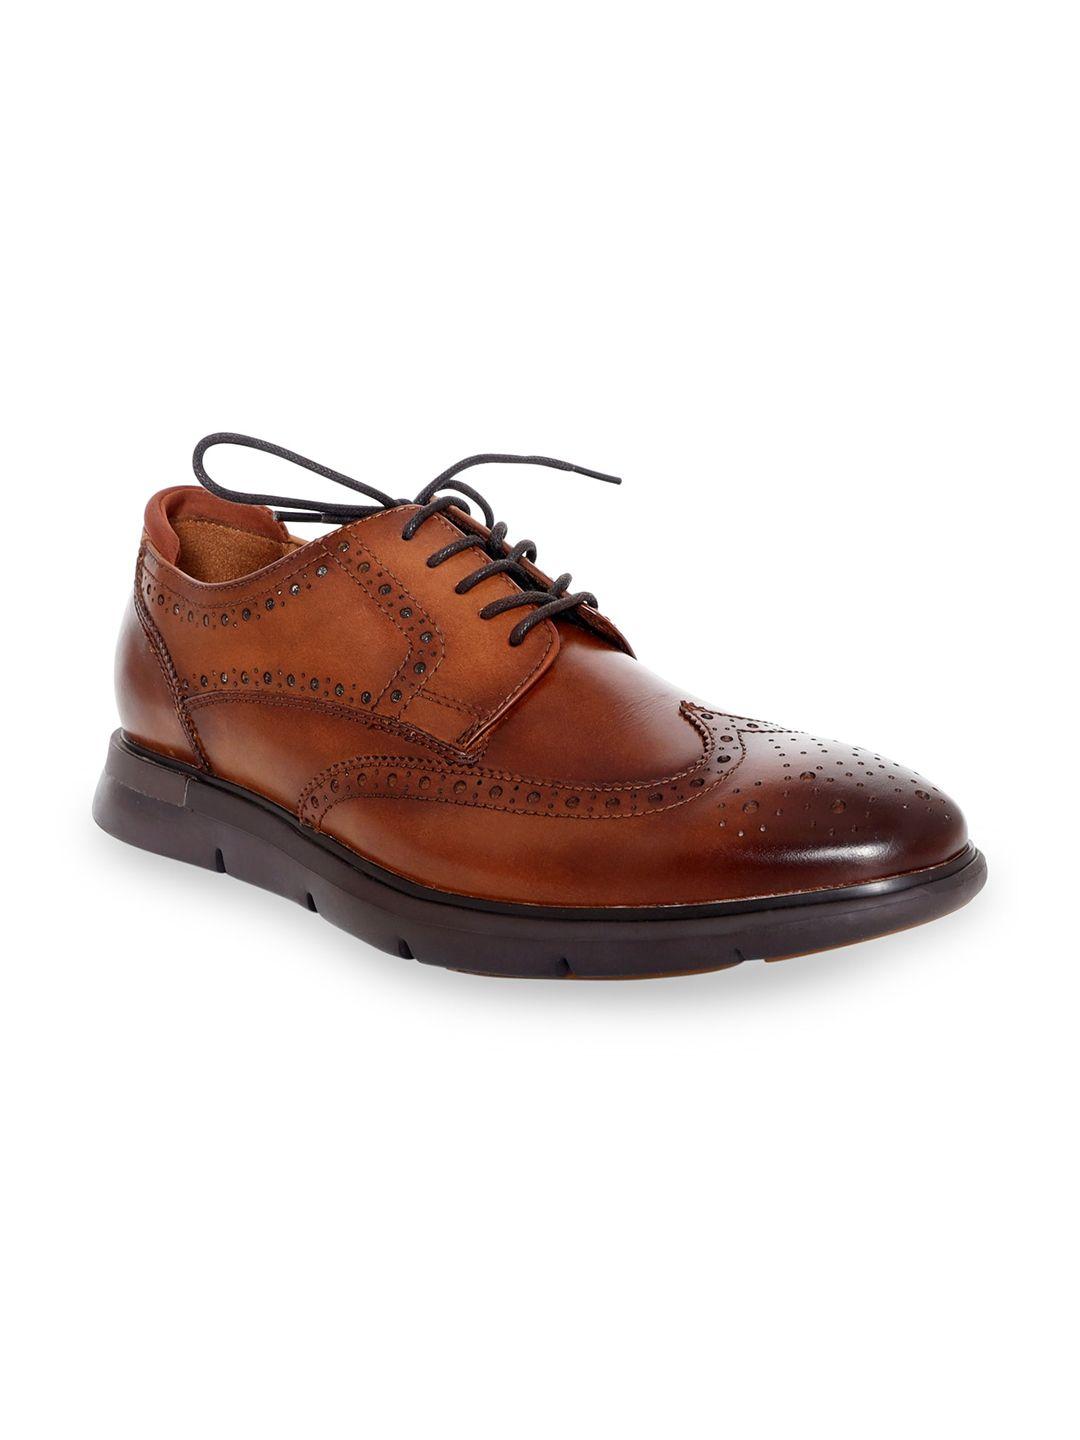 kenneth-cole-men-tan-brown-textured-leather-formal-brogues